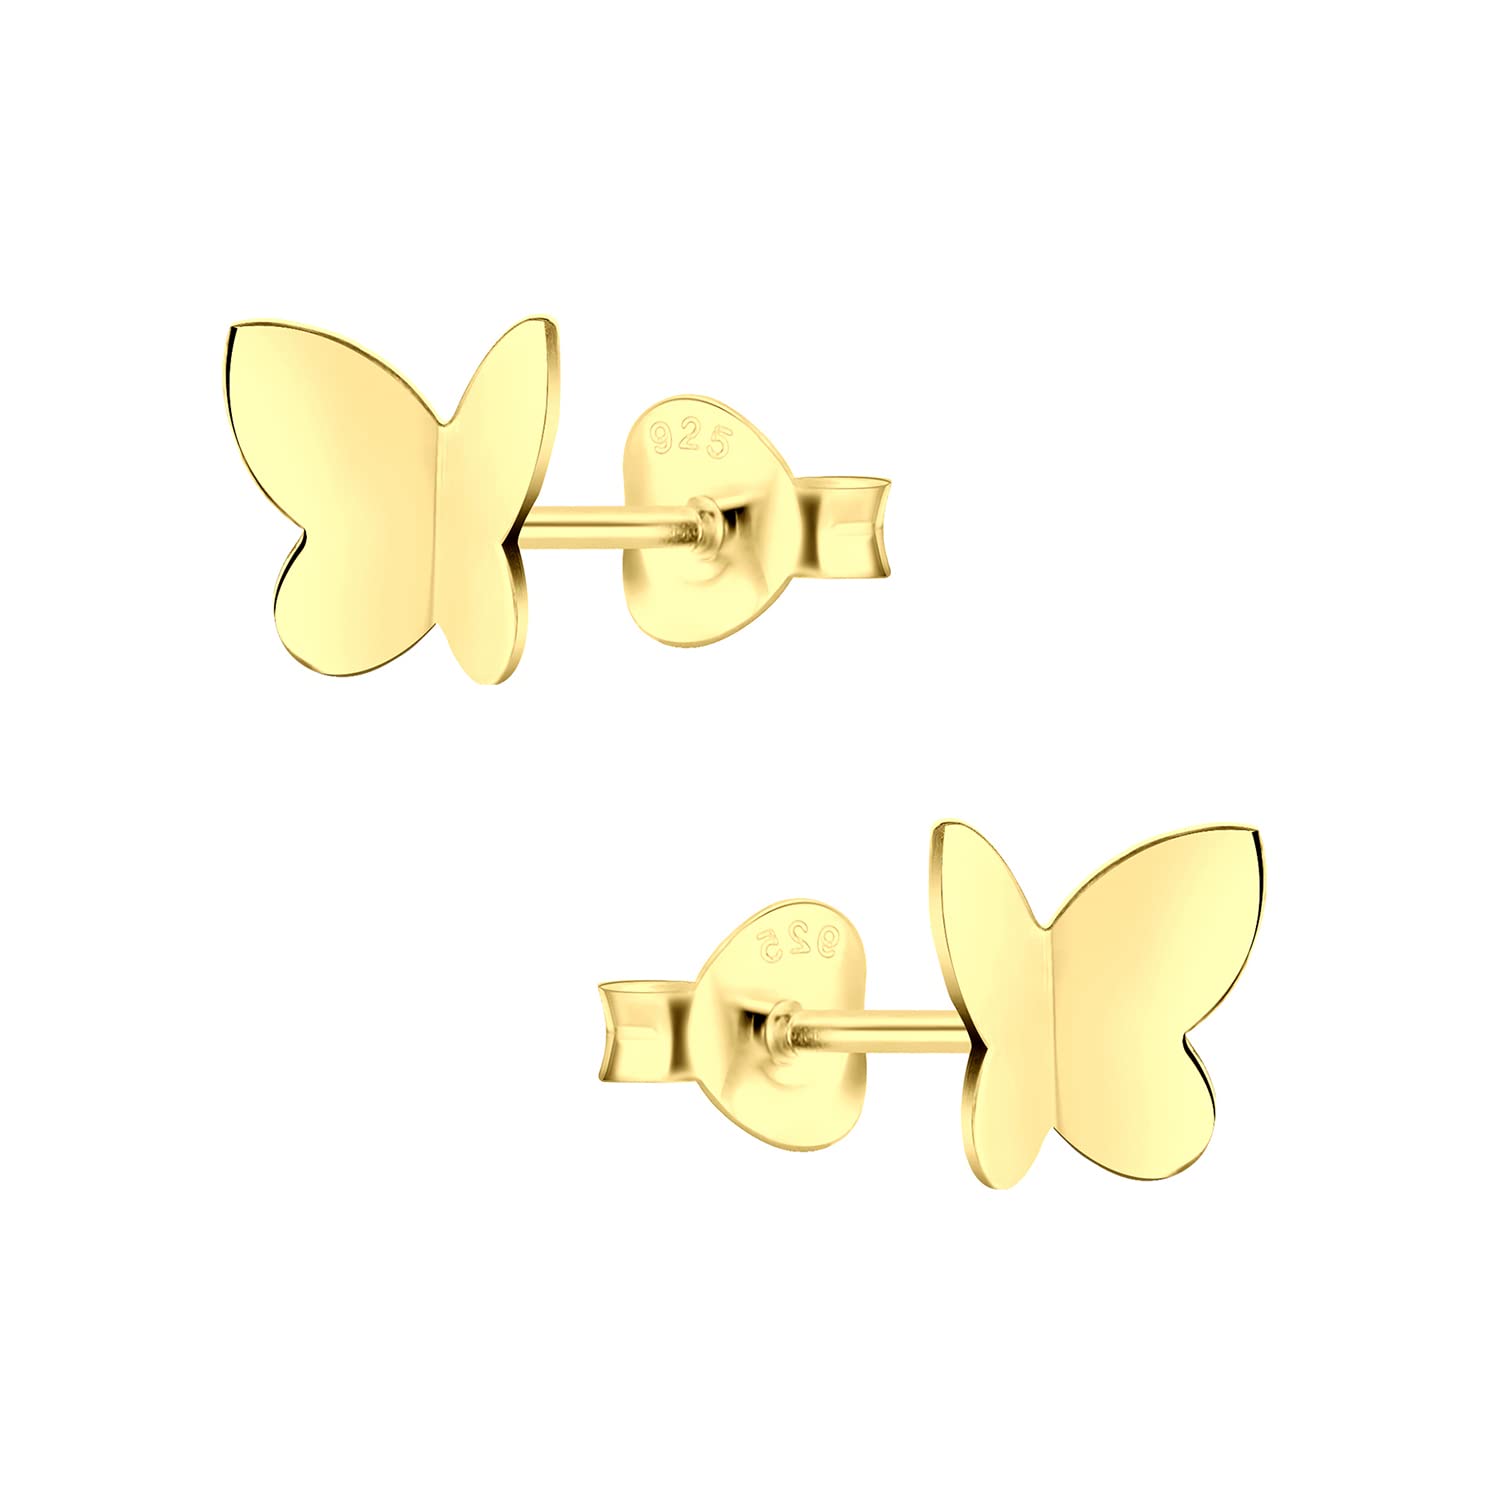 Raajsi by Yellow Chimes 925 Sterling Silver Stud Earring for Girls & Kids Melbees Kids Collection Butterfly Designed |Birthday Gift for Girls Kids | With Certificate of Authenticity & 6 Month Warranty